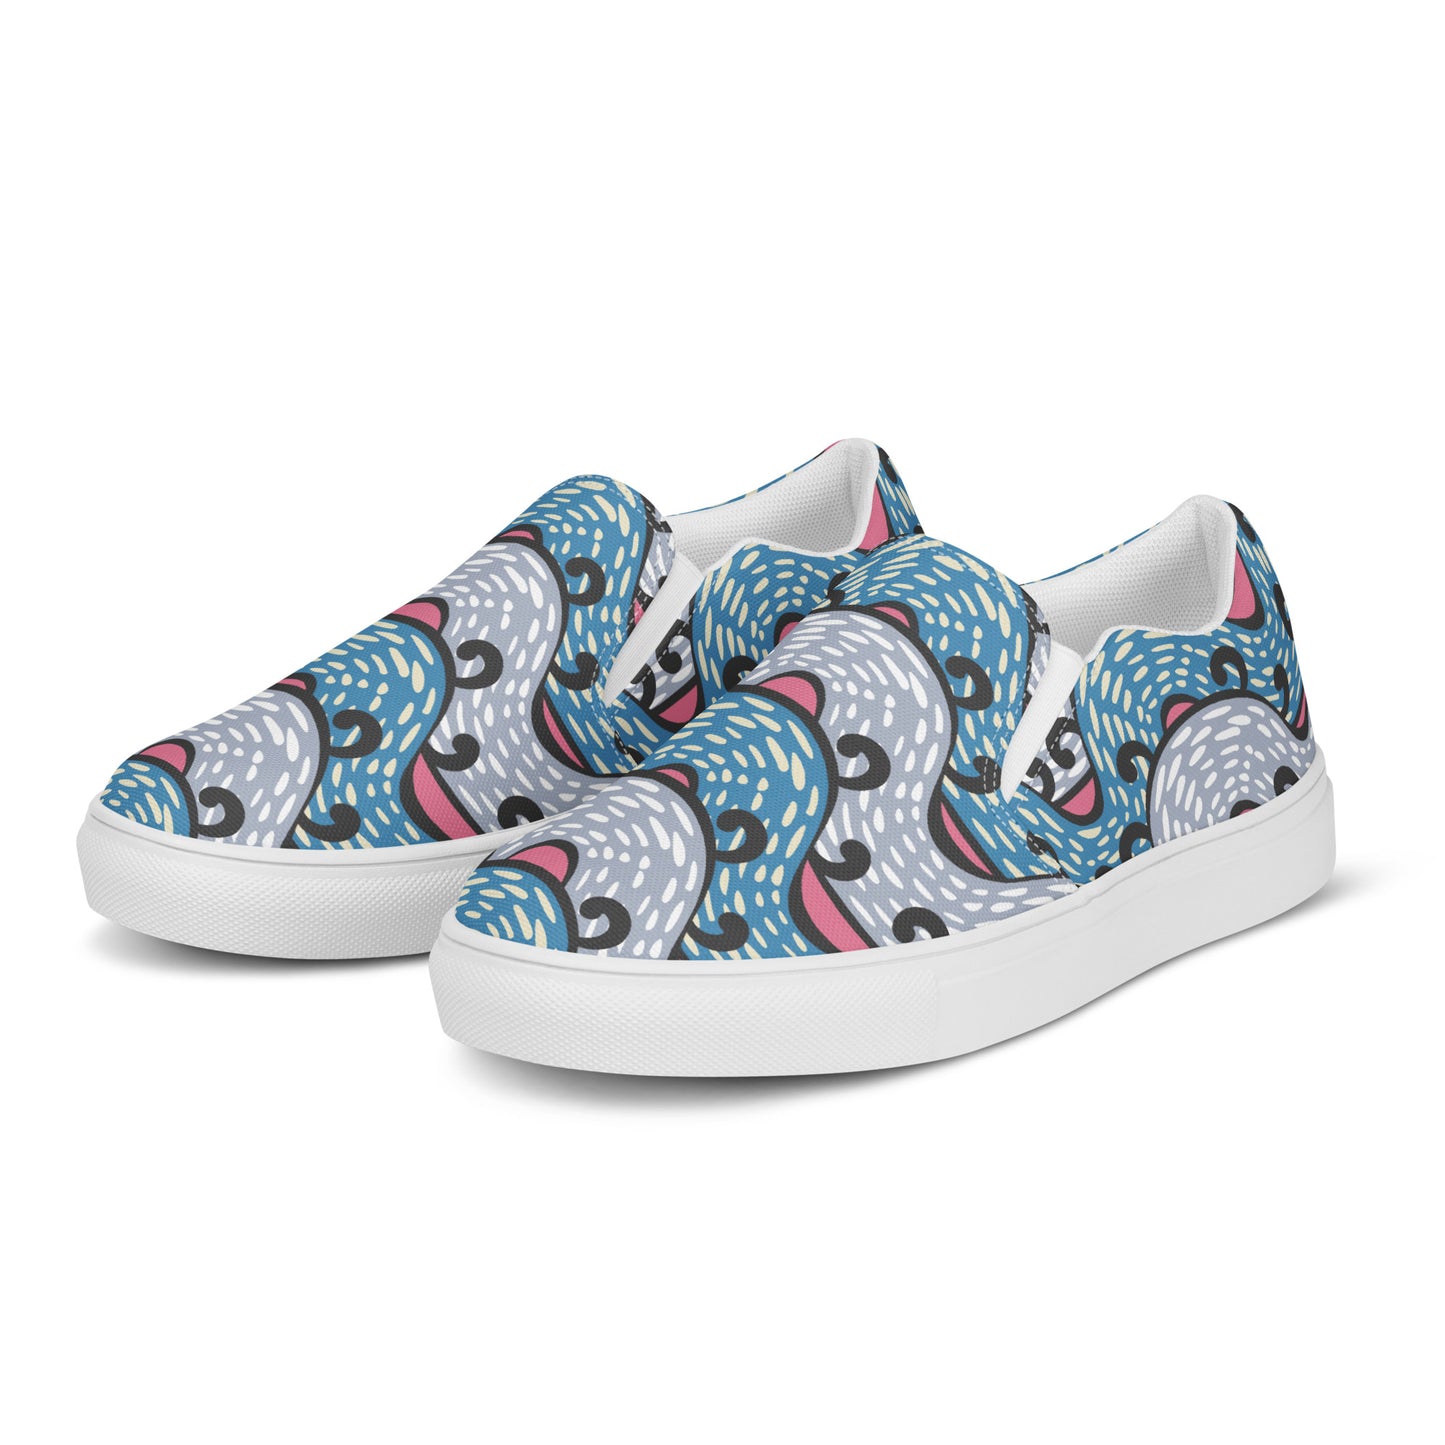 WAVES OF WAVES women’s canvas slip ons